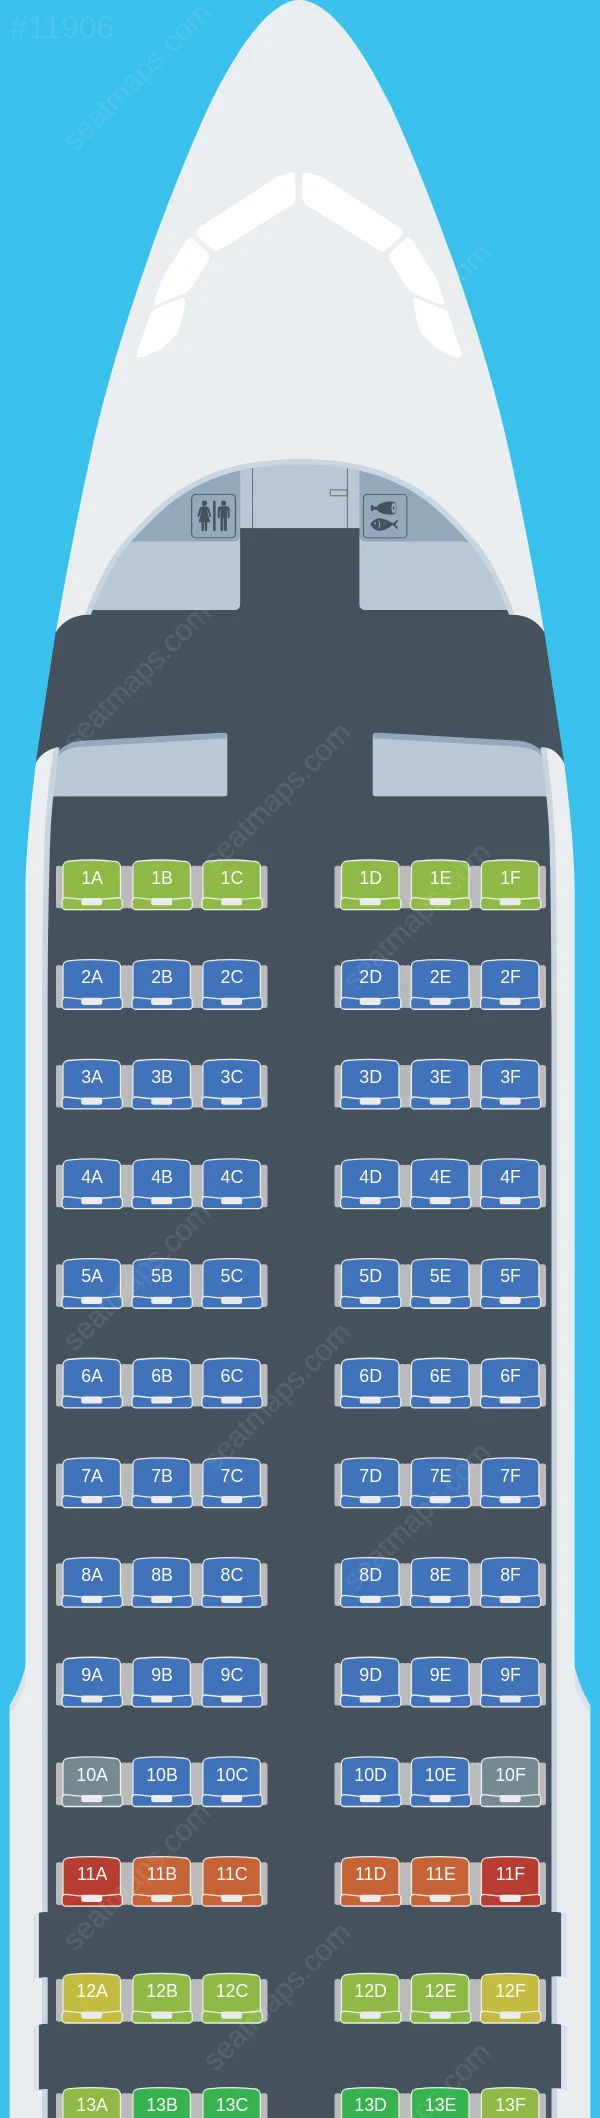 FlyArystan Airbus A320neo V.1 seatmap preview